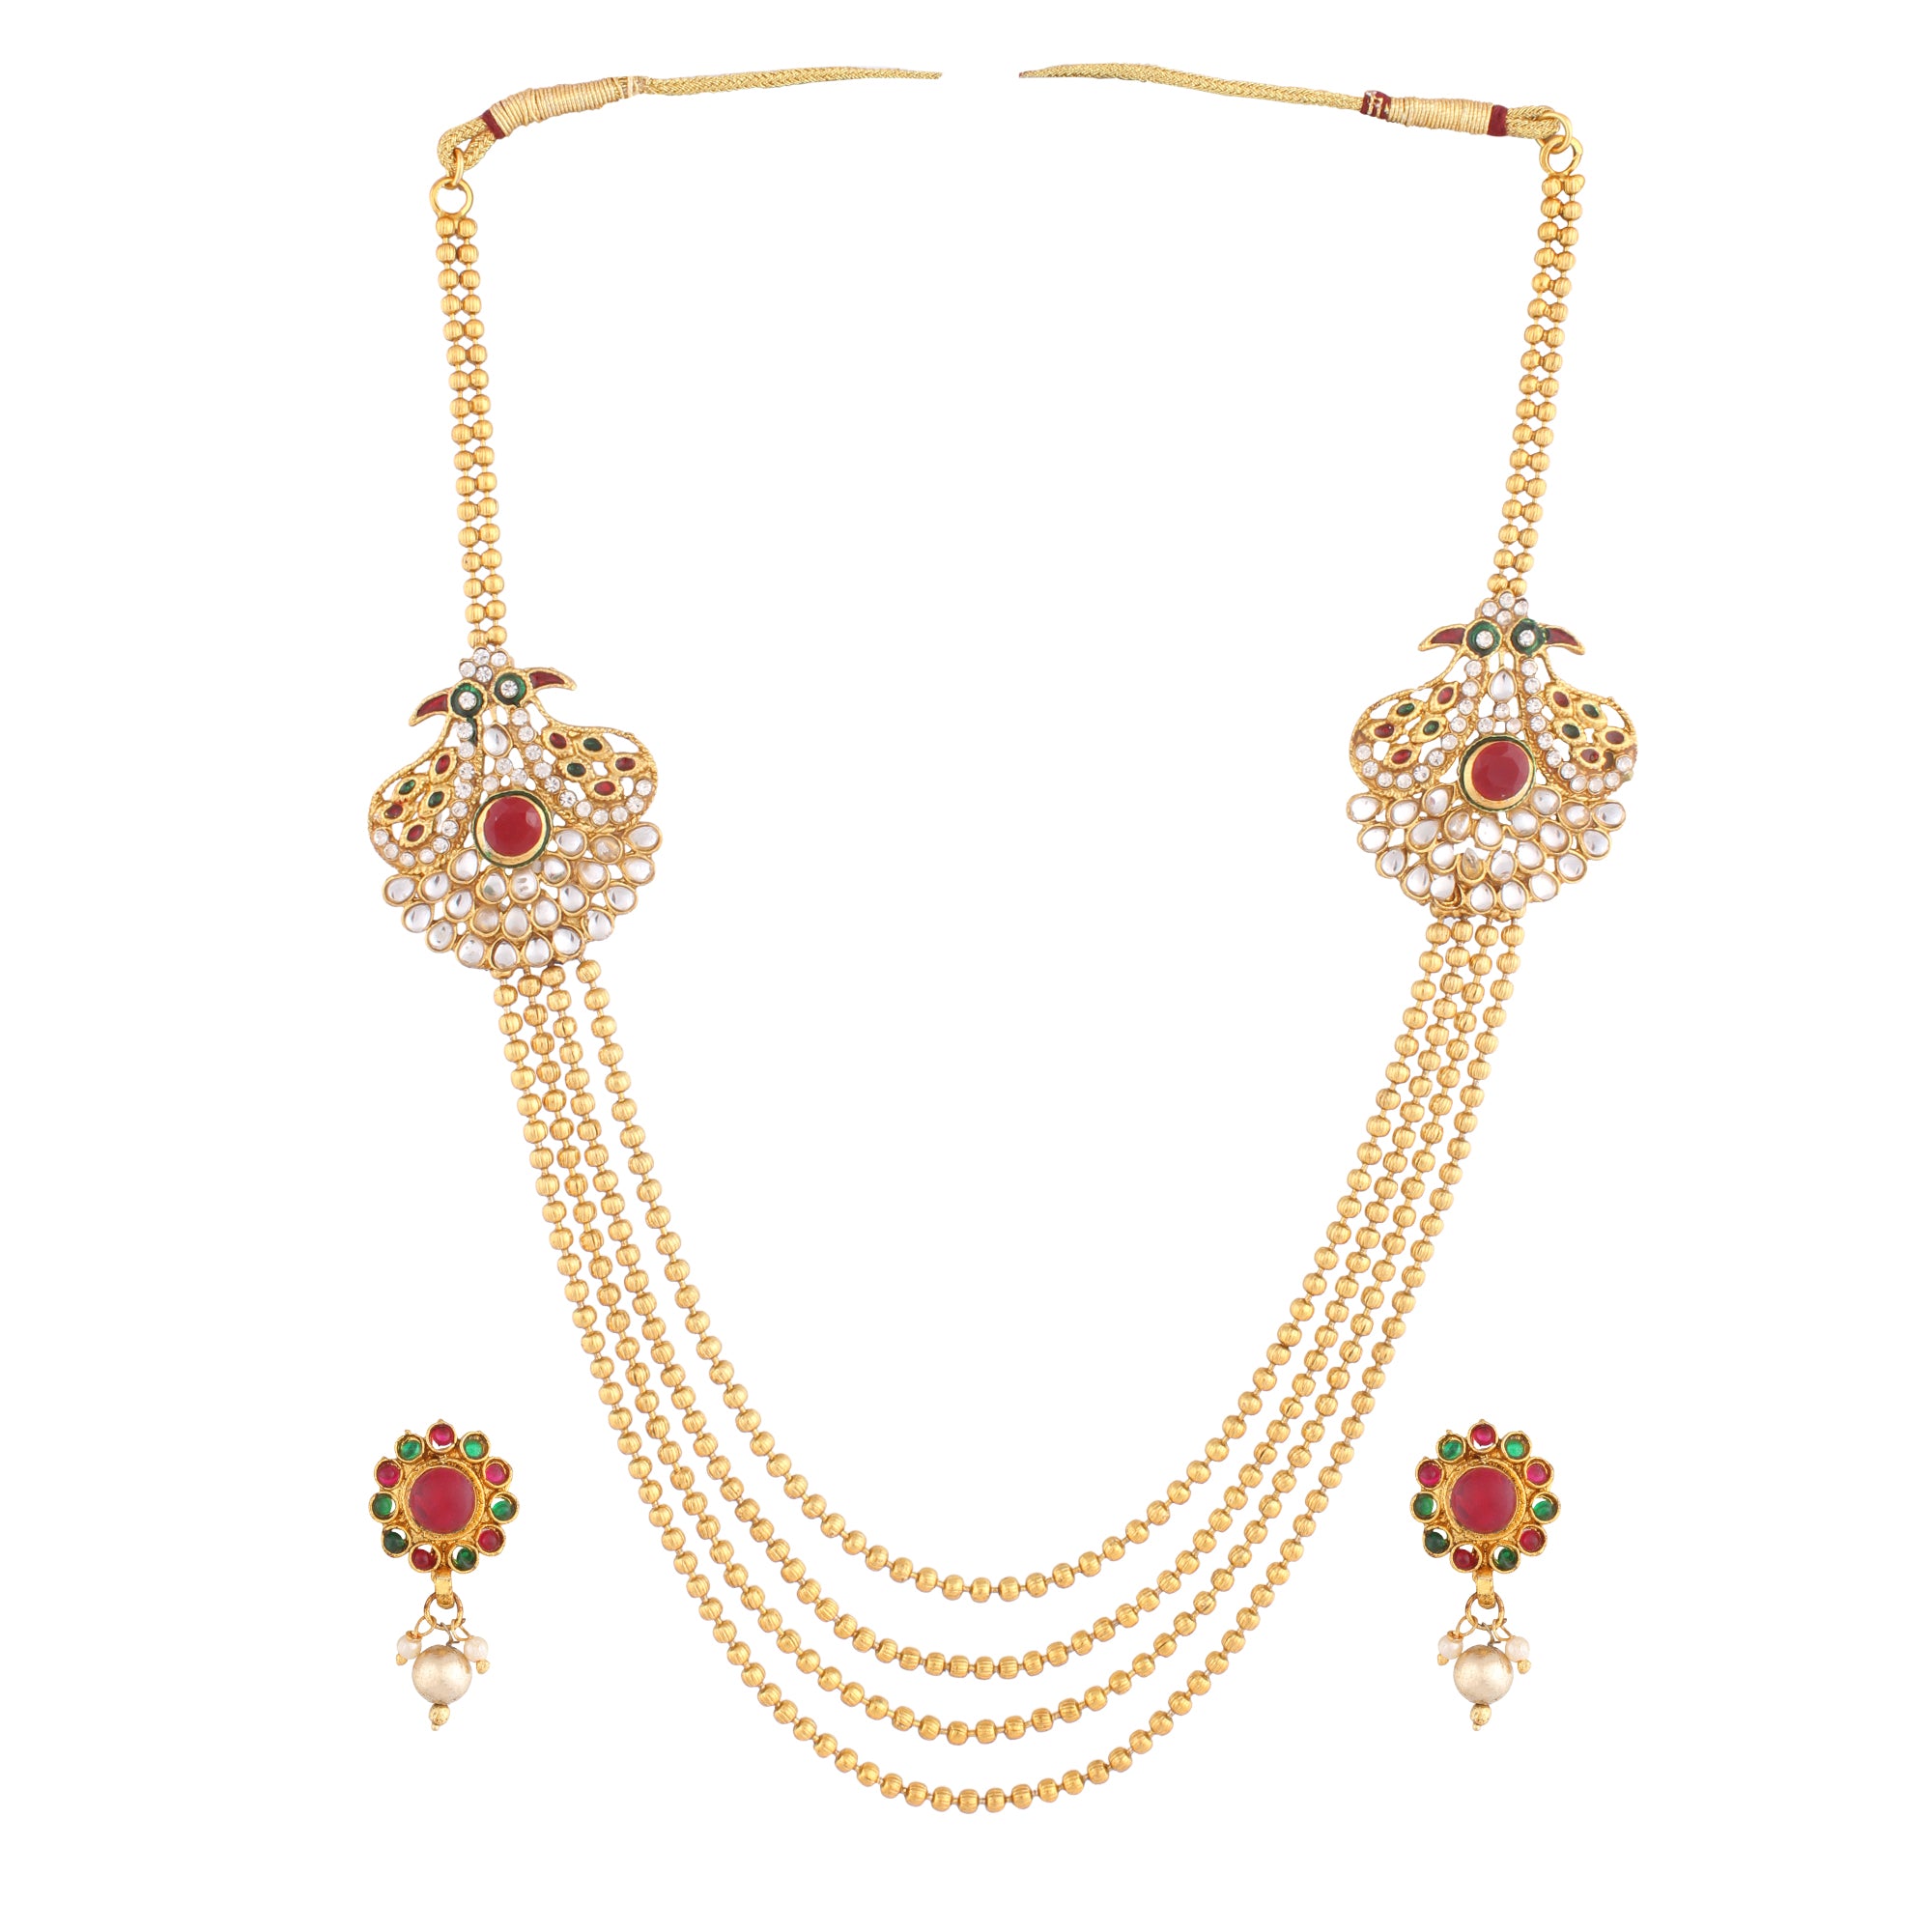 Gold Plated Multi-Strand Necklace With Earrings Set For Women